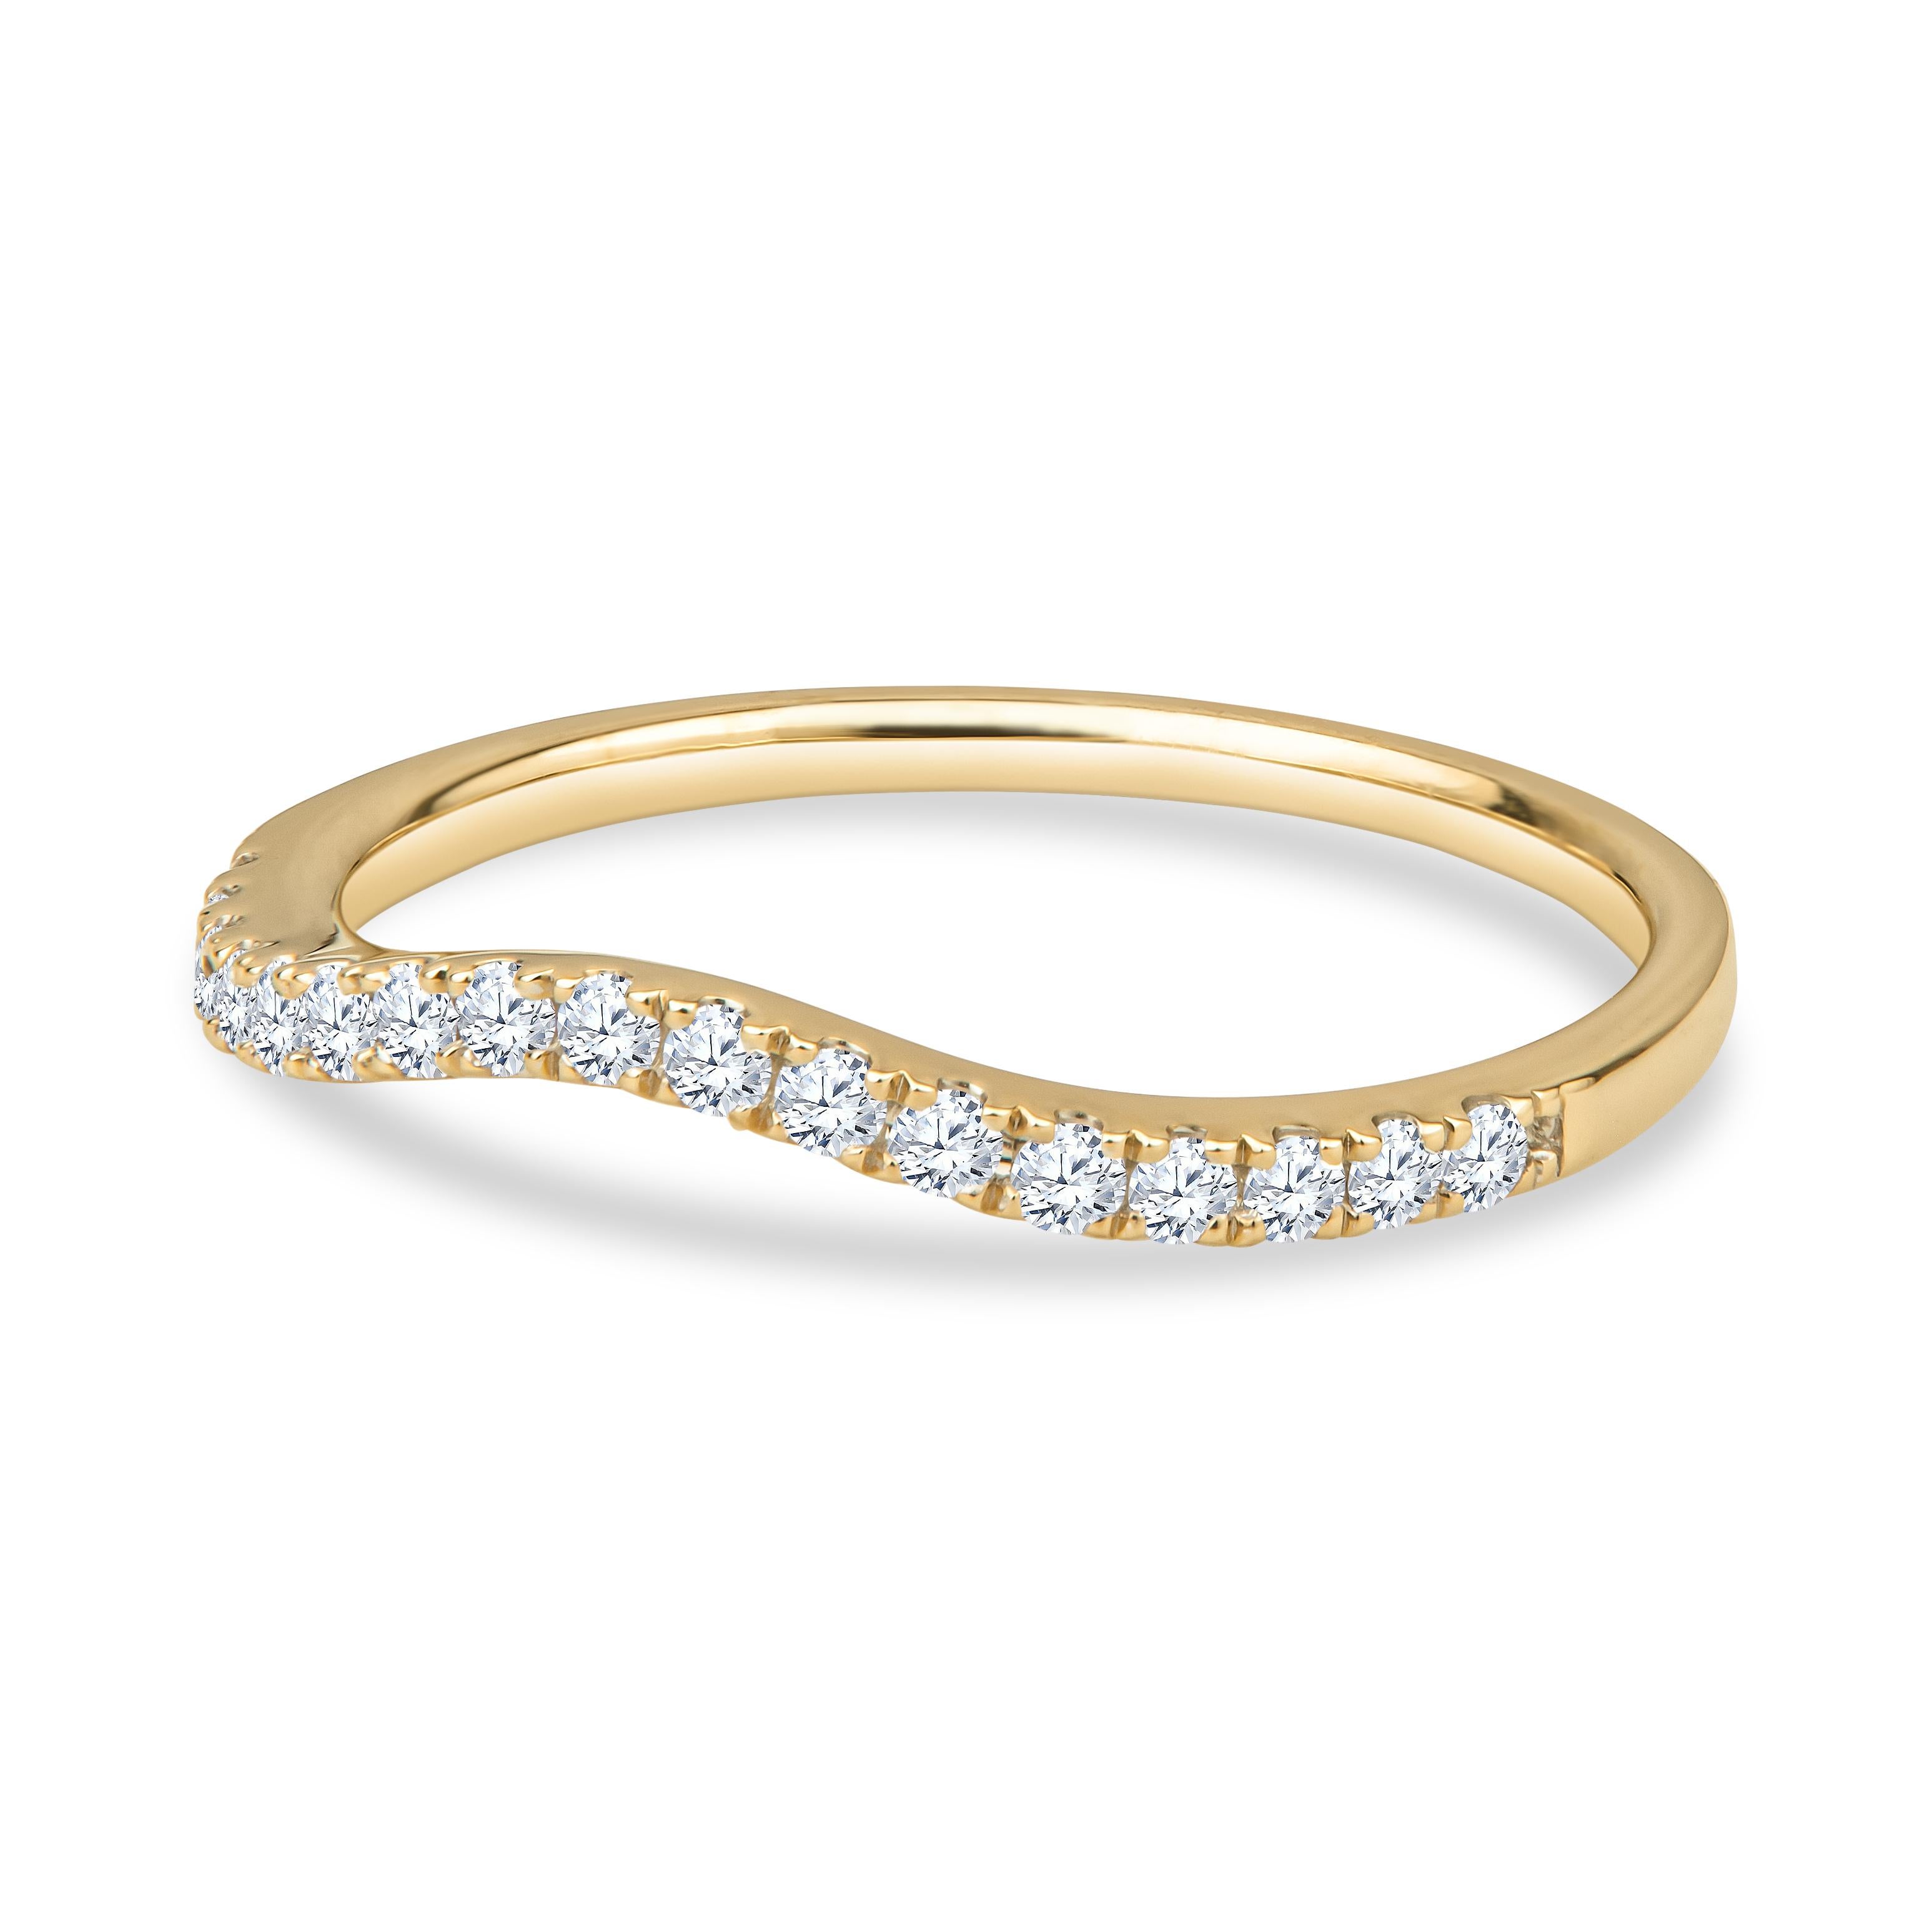 This beautiful, simple curved band adds just enough flair while still keeping it subtle. The ring is made of 18kt yellow gold and features 0.21ctw in round brilliant diamonds. It is currently a size 6.5, but may be resized to be smaller or larger